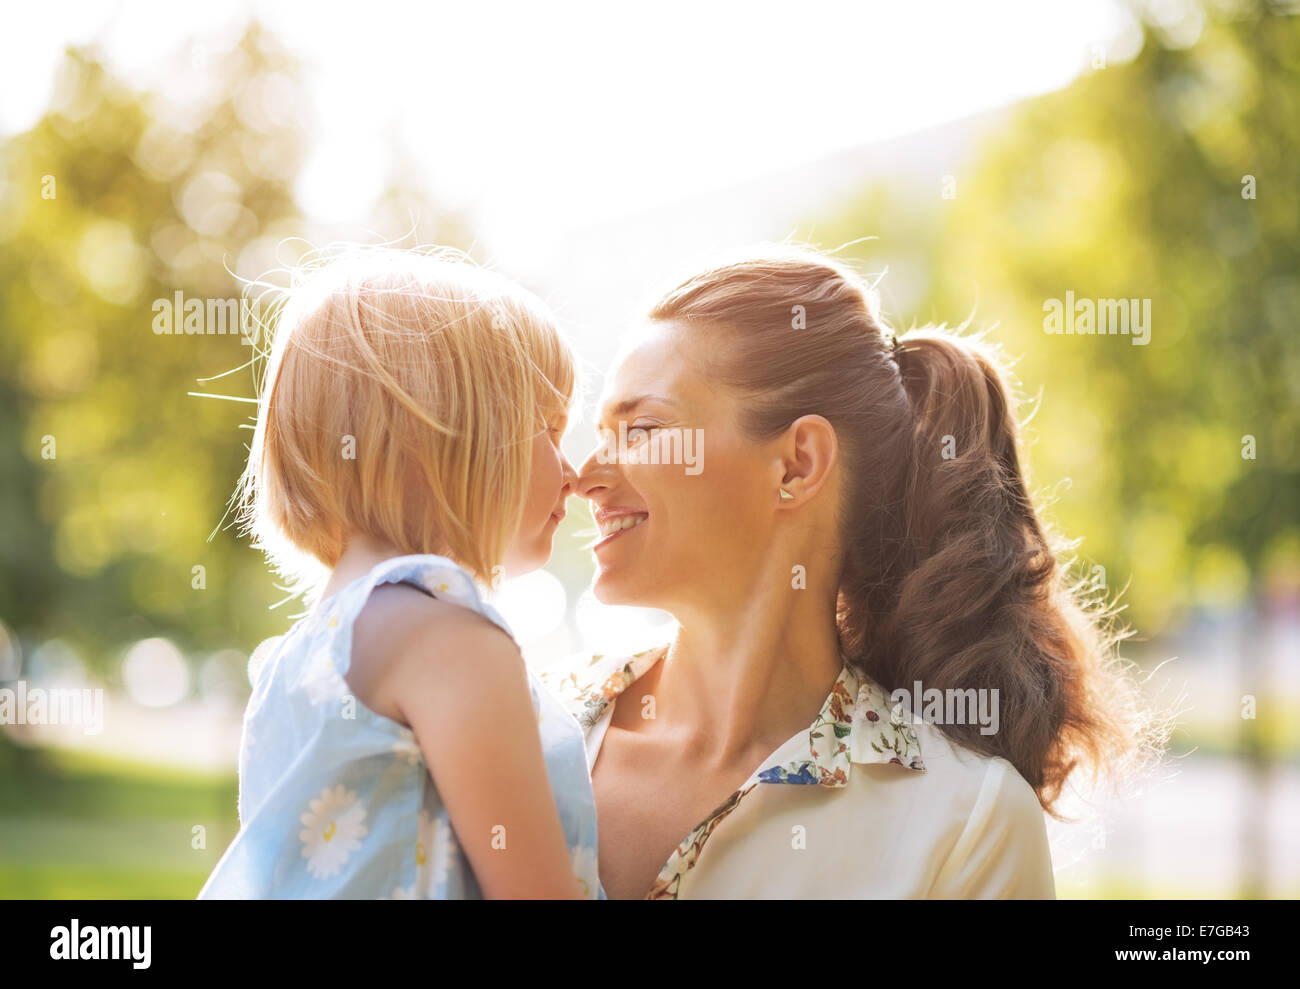 Portrait of happy mother and baby girl outdoors Stock Photo